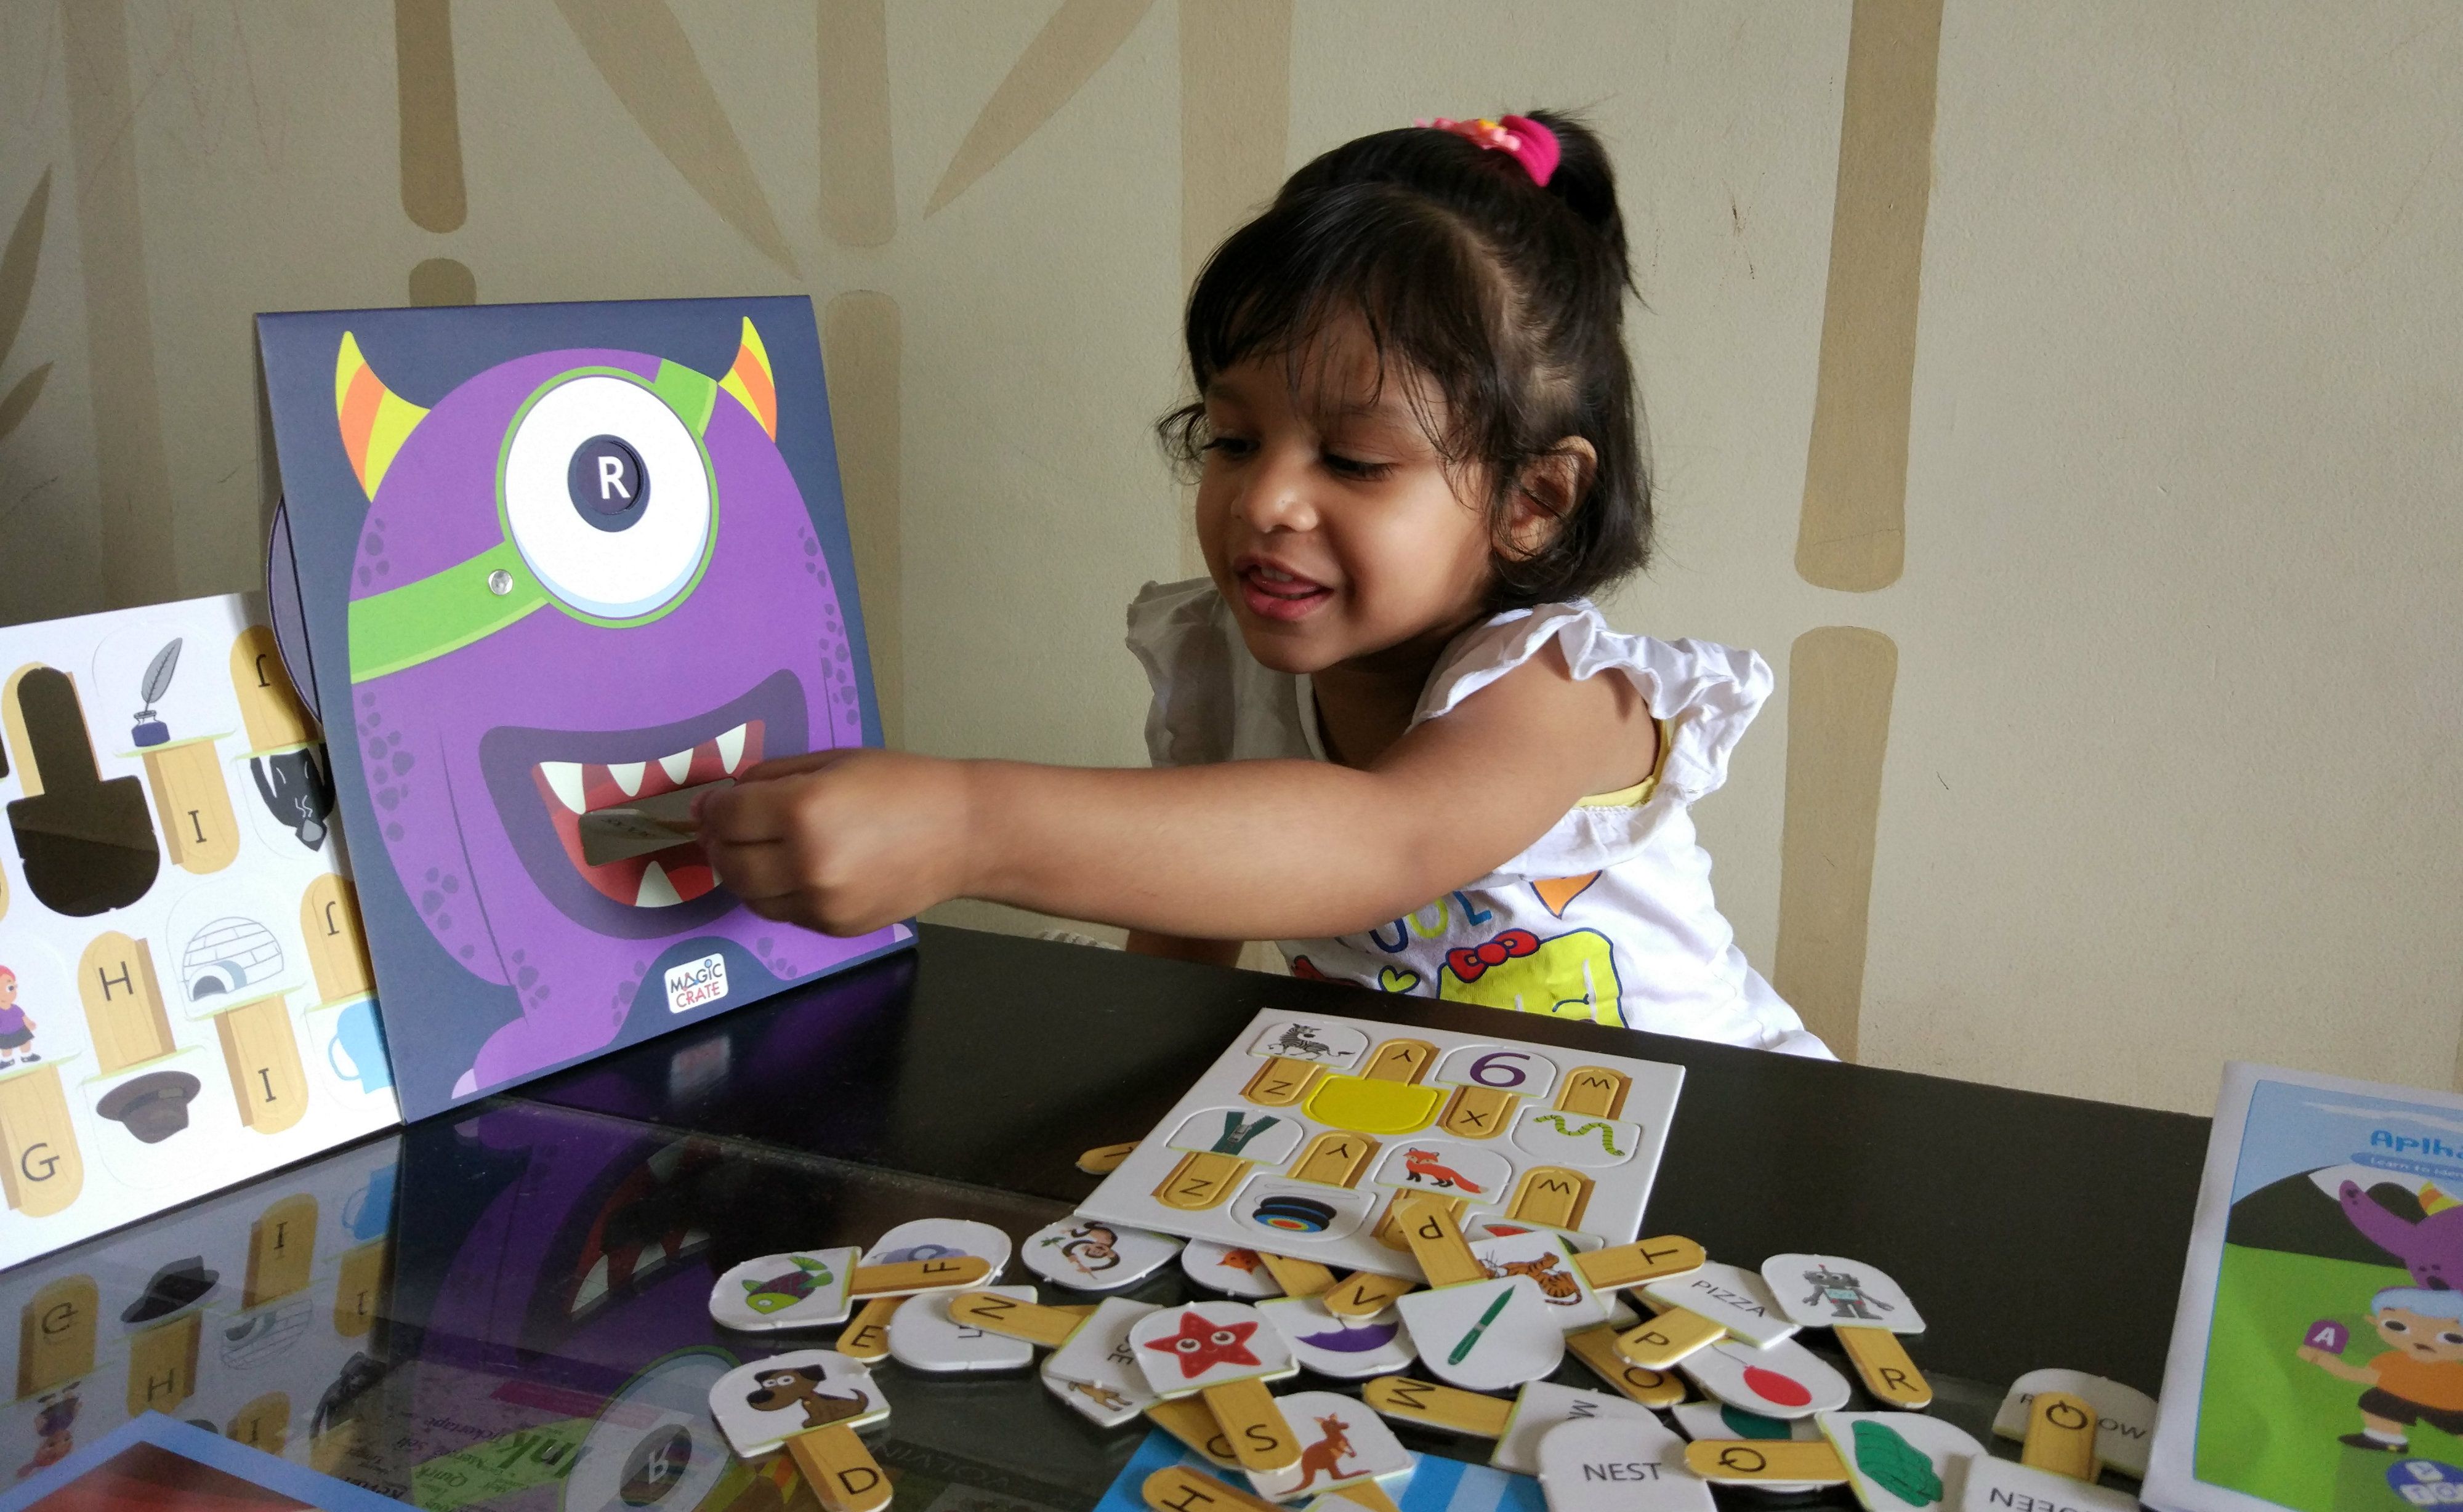 Box of joy - Magic Crate offers fun learning activities for children